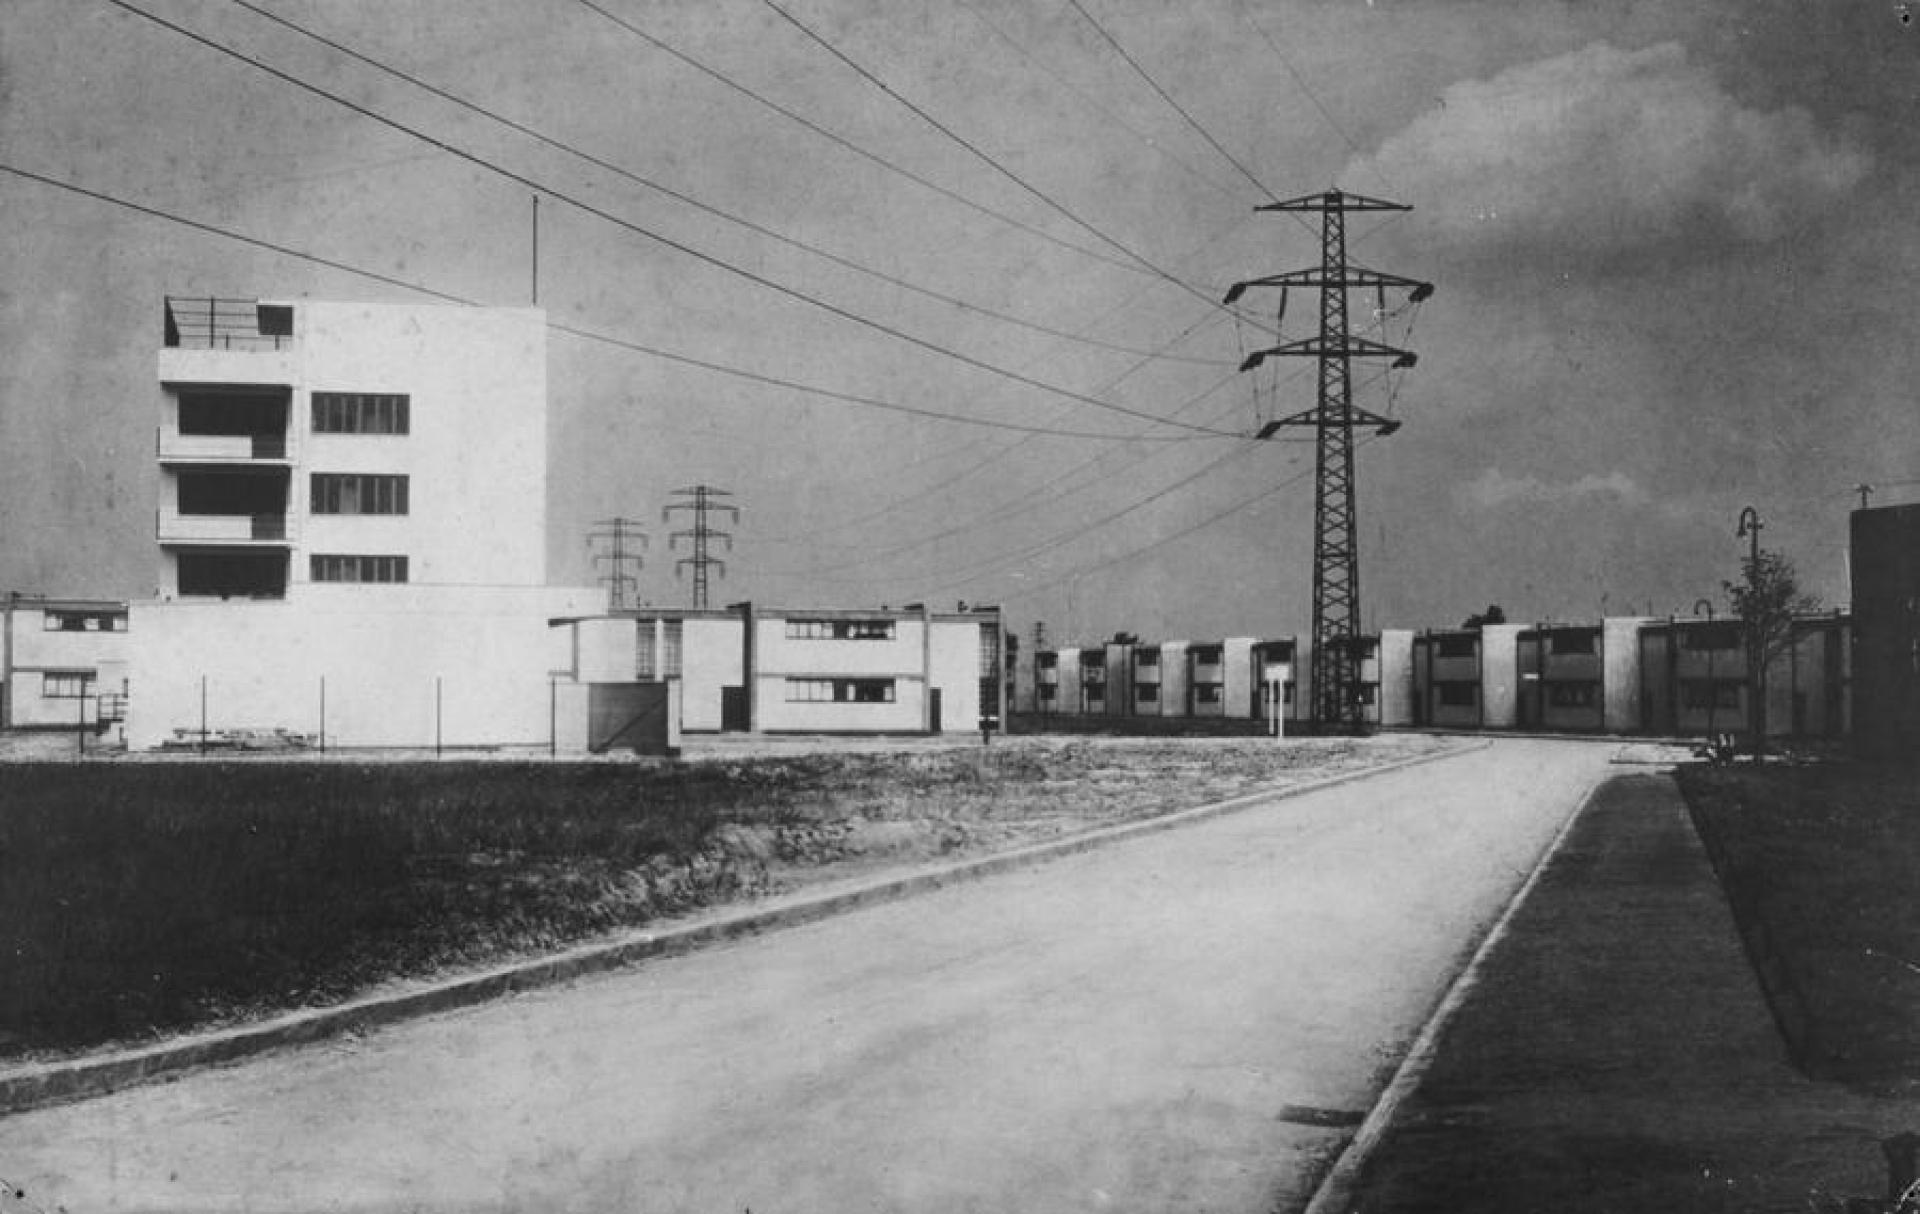 Dessau Törten Housing Estate with Buildings of the Cooperative Society from the Southeast, around 1928. | Photo © Stiftung Bauhaus Dessau